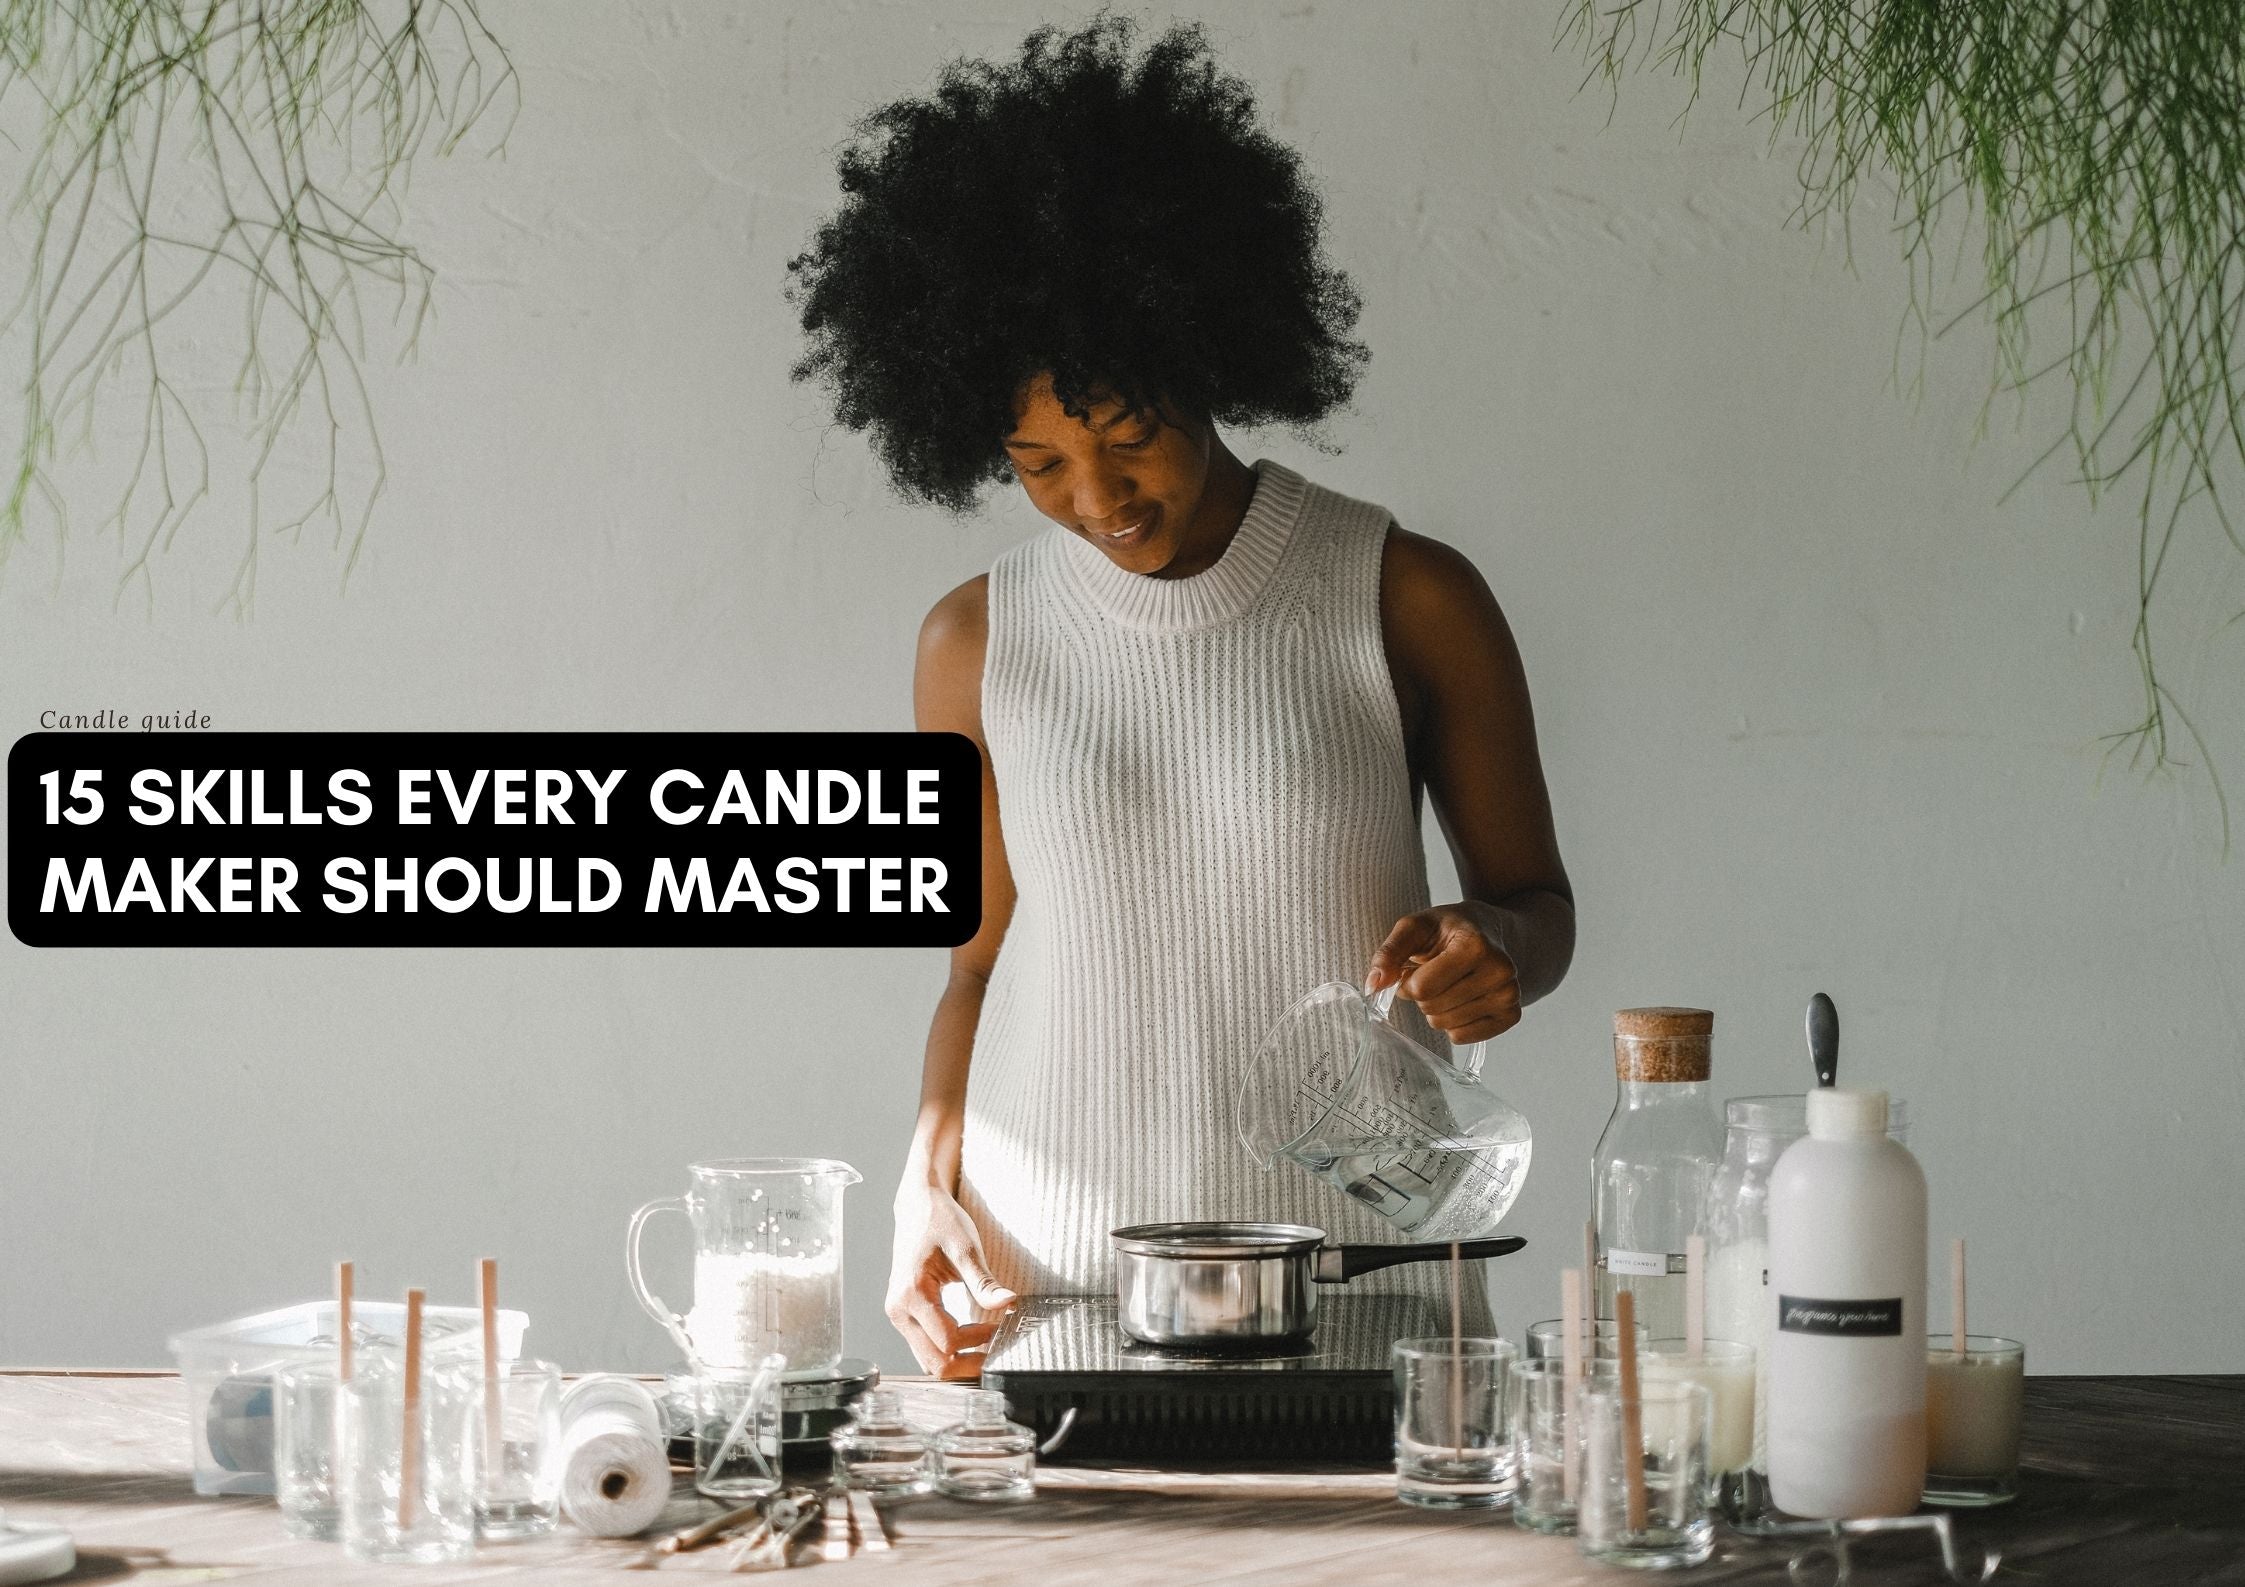 15 skills every candle maker should master